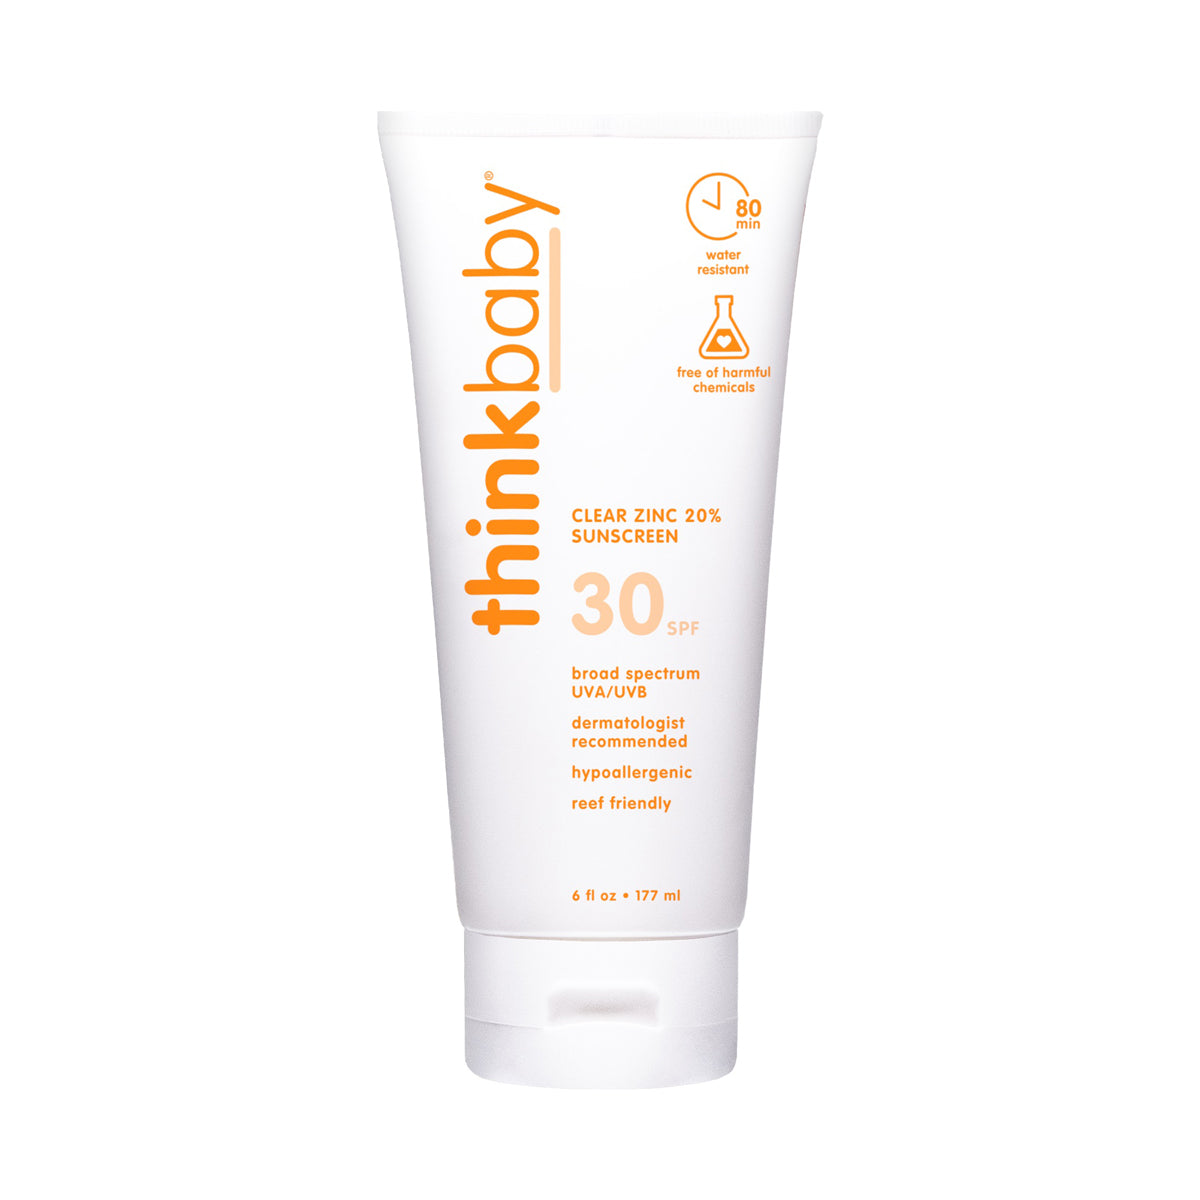 ThinkBaby Clear Zinc 30 SPF Sunscreen tube front view, showcasing broad-spectrum UV protection, hypoallergenic and reef-friendly formula.